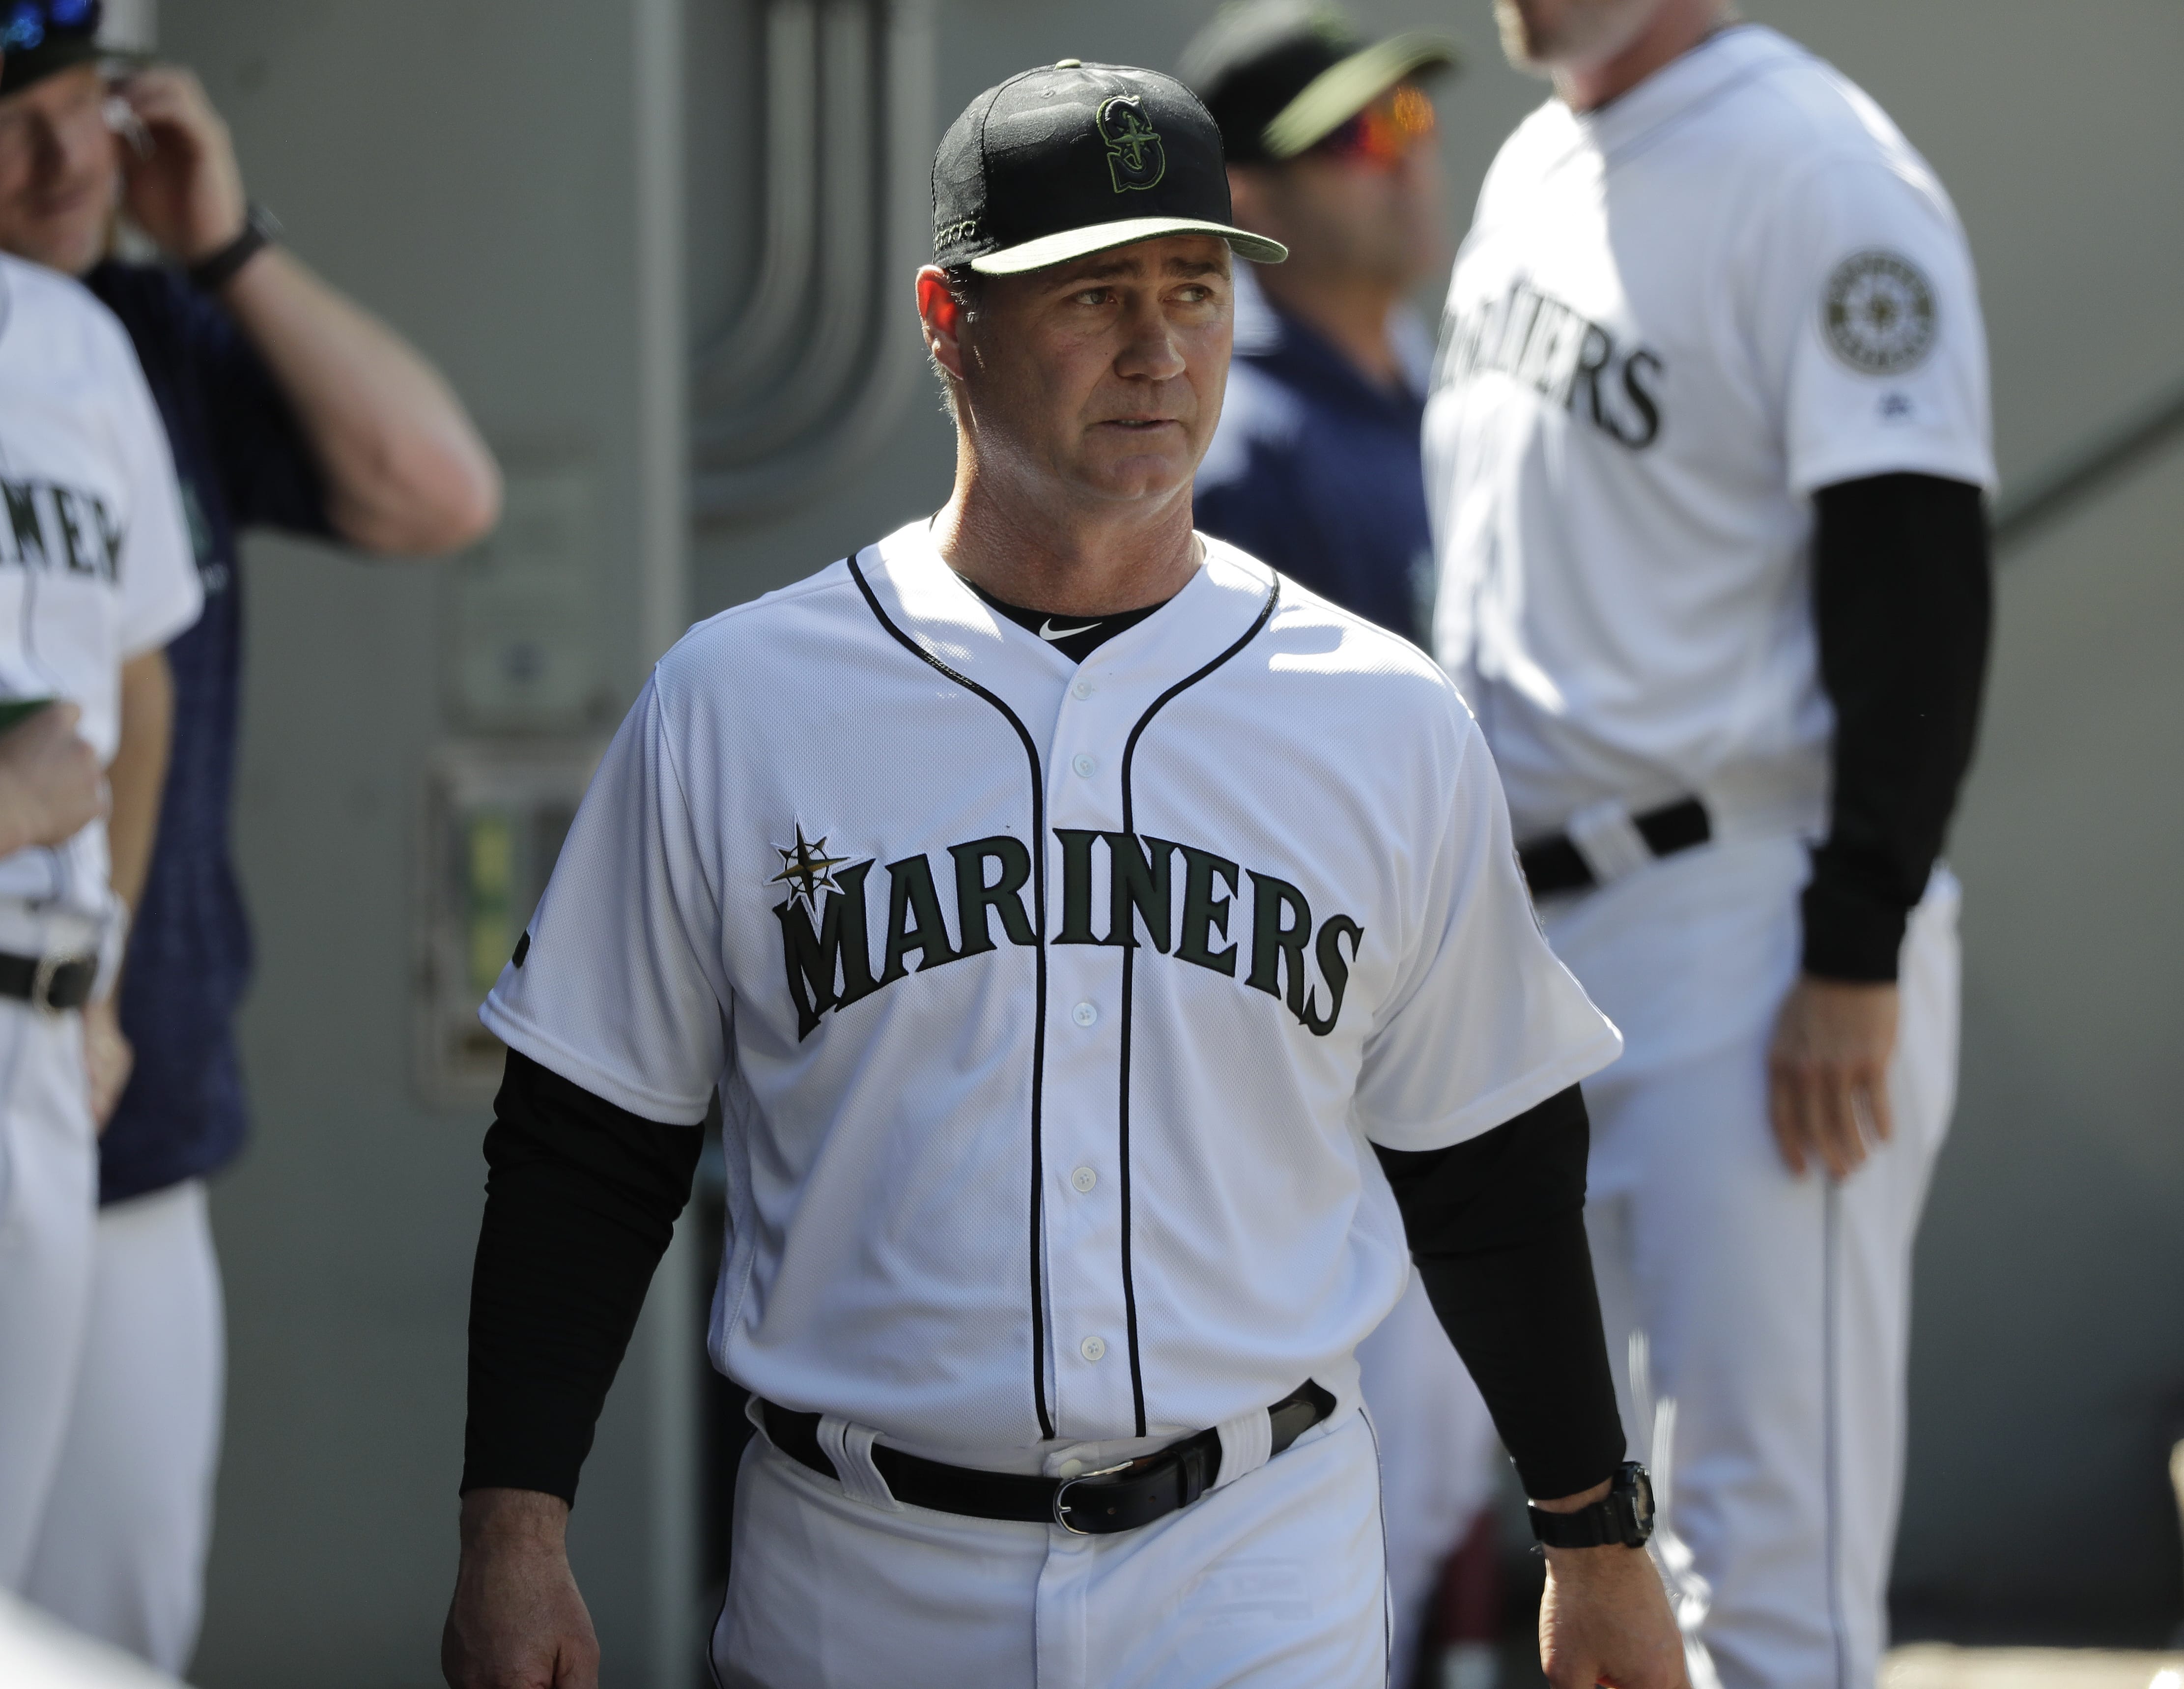 The Seattle Mariners have given manager Scott Servais a multiyear contract extension with the club in position to potentially end the longest current playoff drought in the four major pro sports. Seattle announced the extension for Servais on Friday, July 20, 2018. (AP Photo/Ted S.